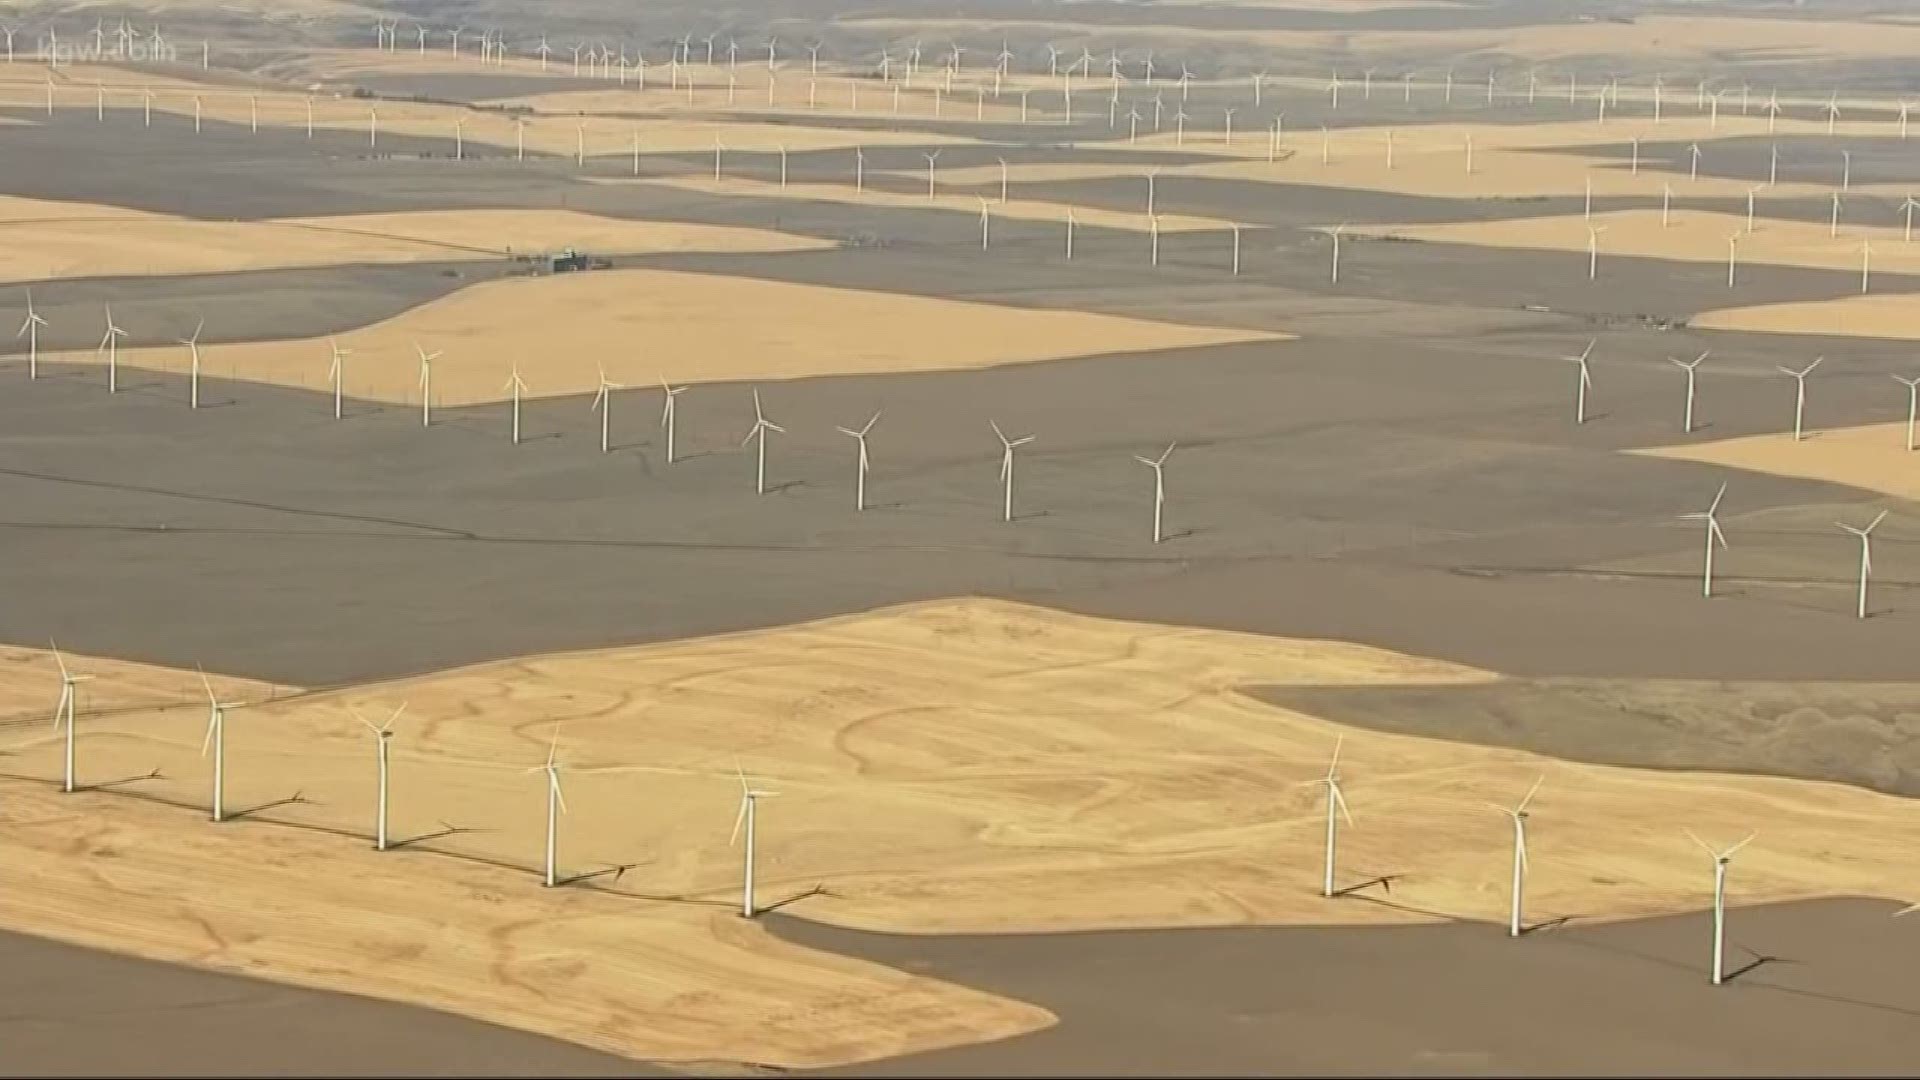 Eagles are getting some protection from wind turbines.